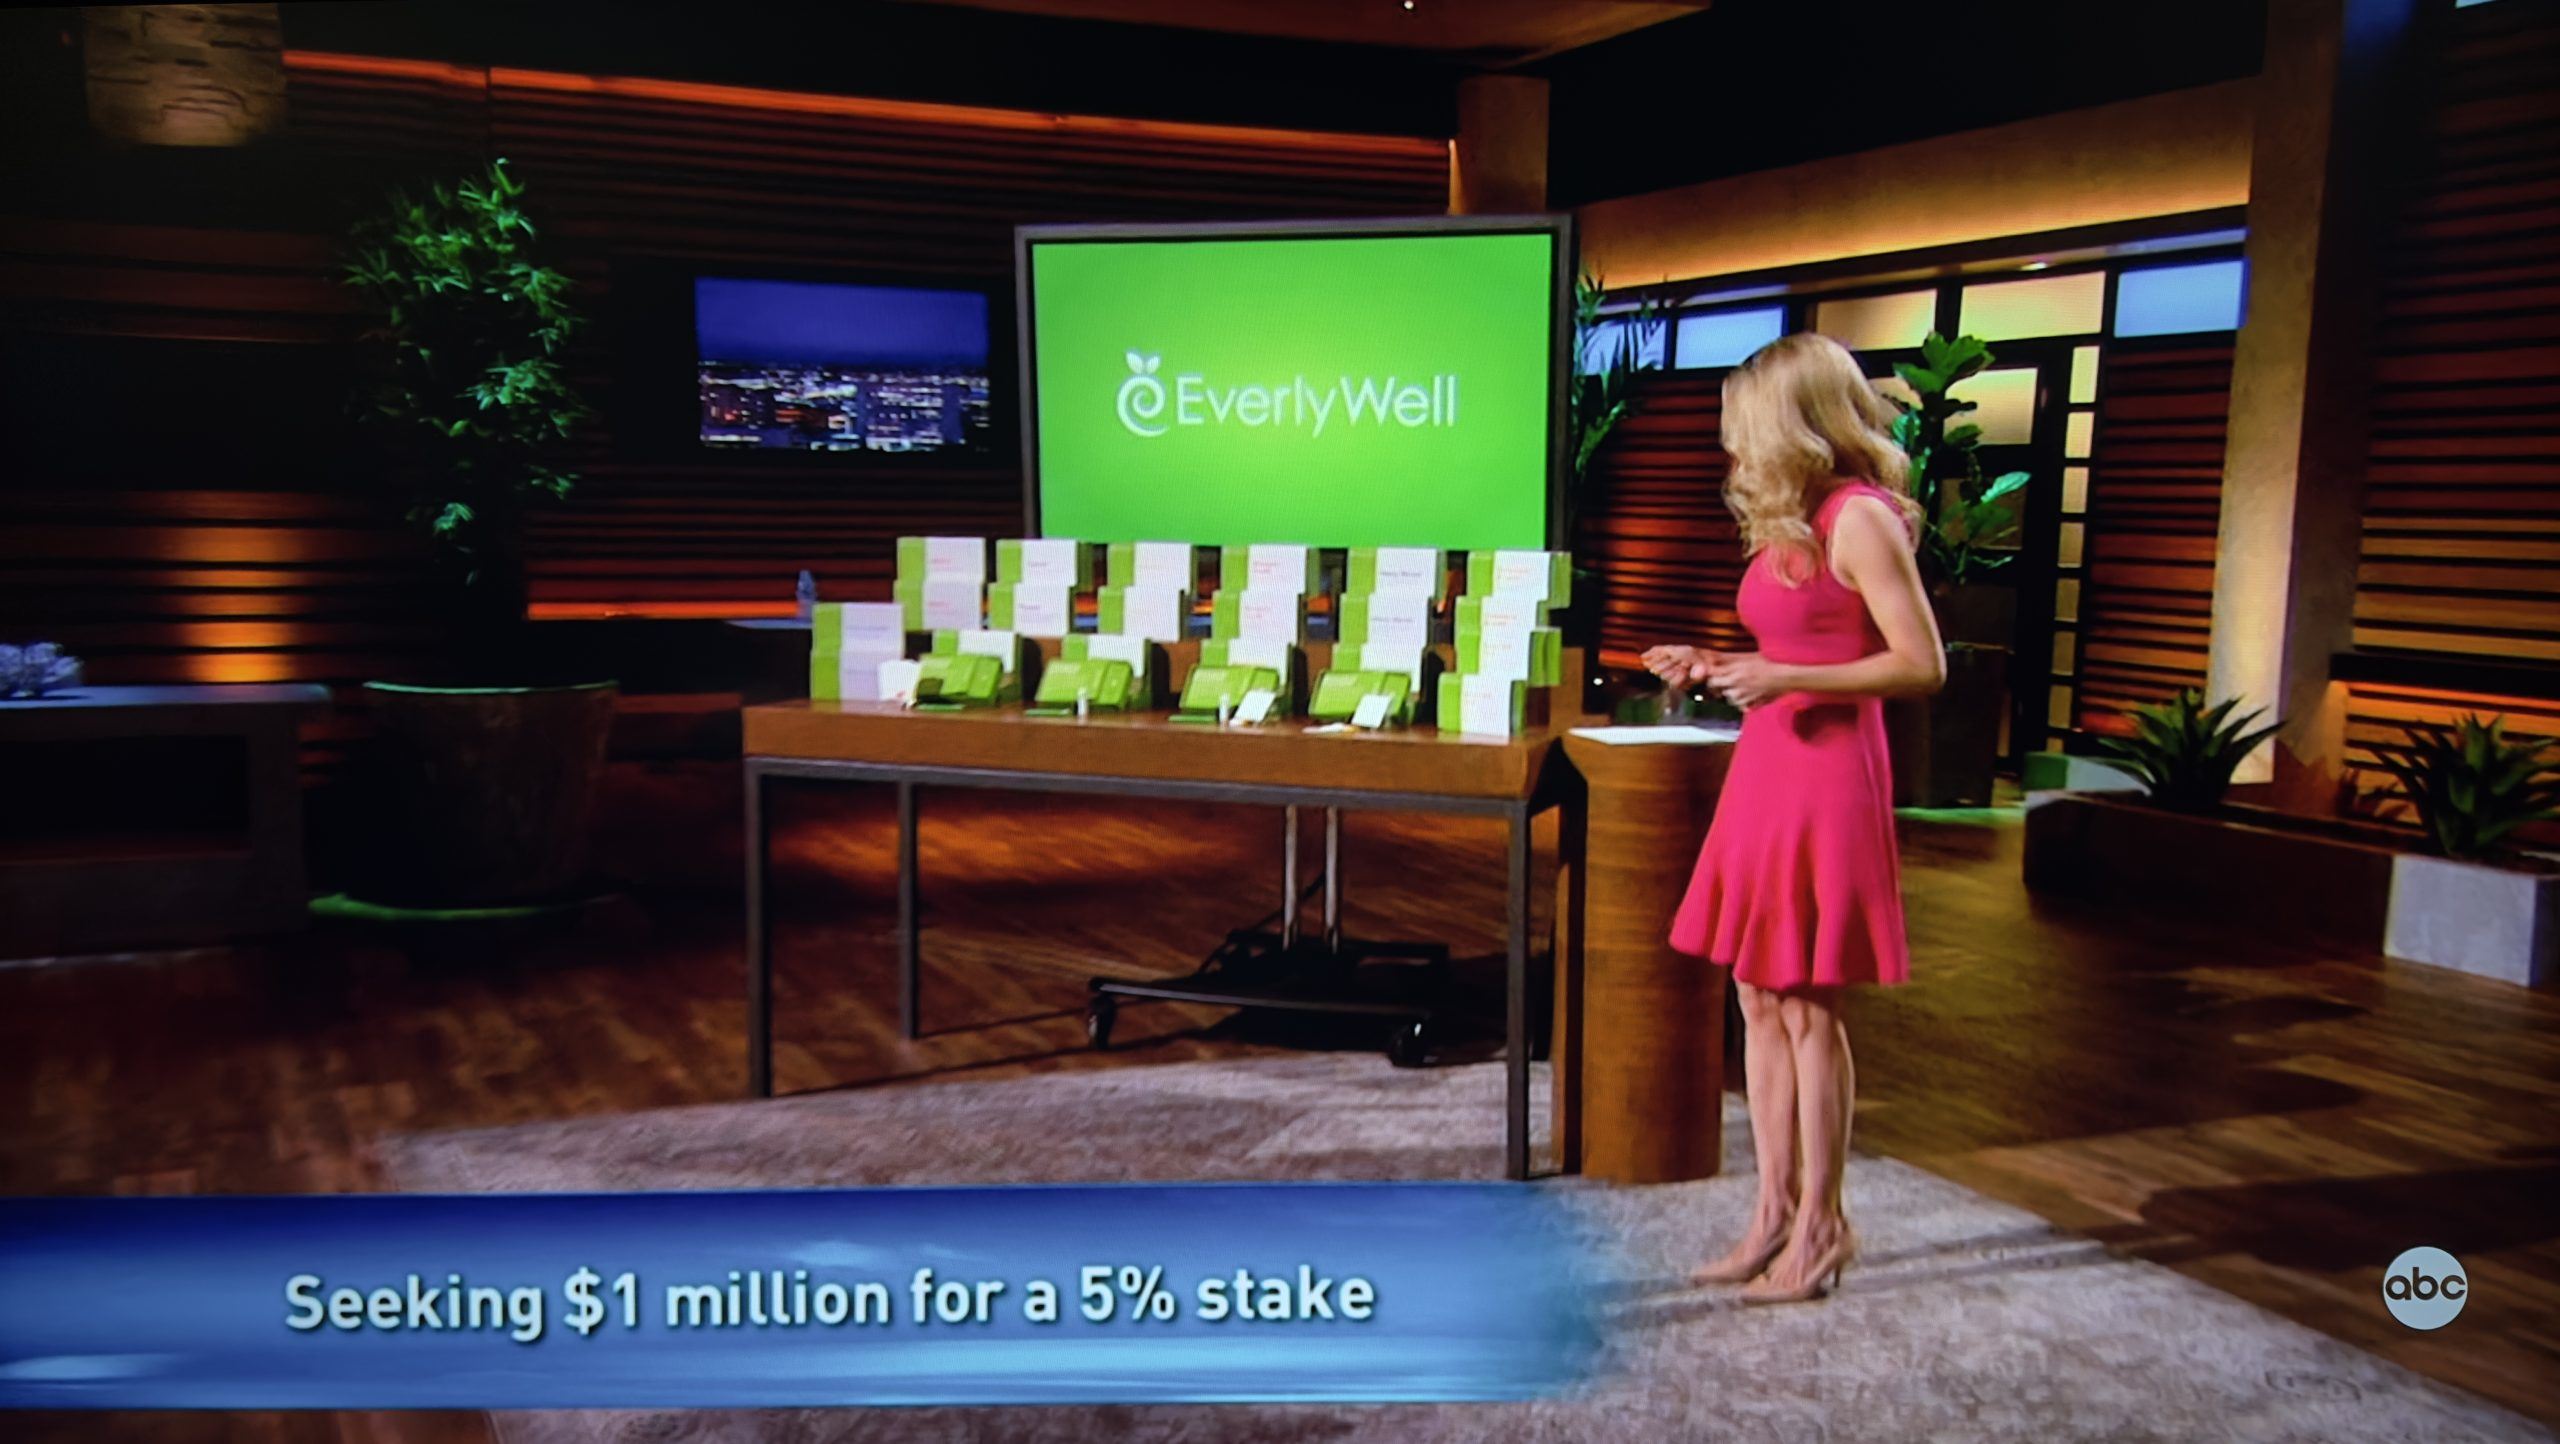 Secrets of 'Shark Tank': Stanford students share their stories